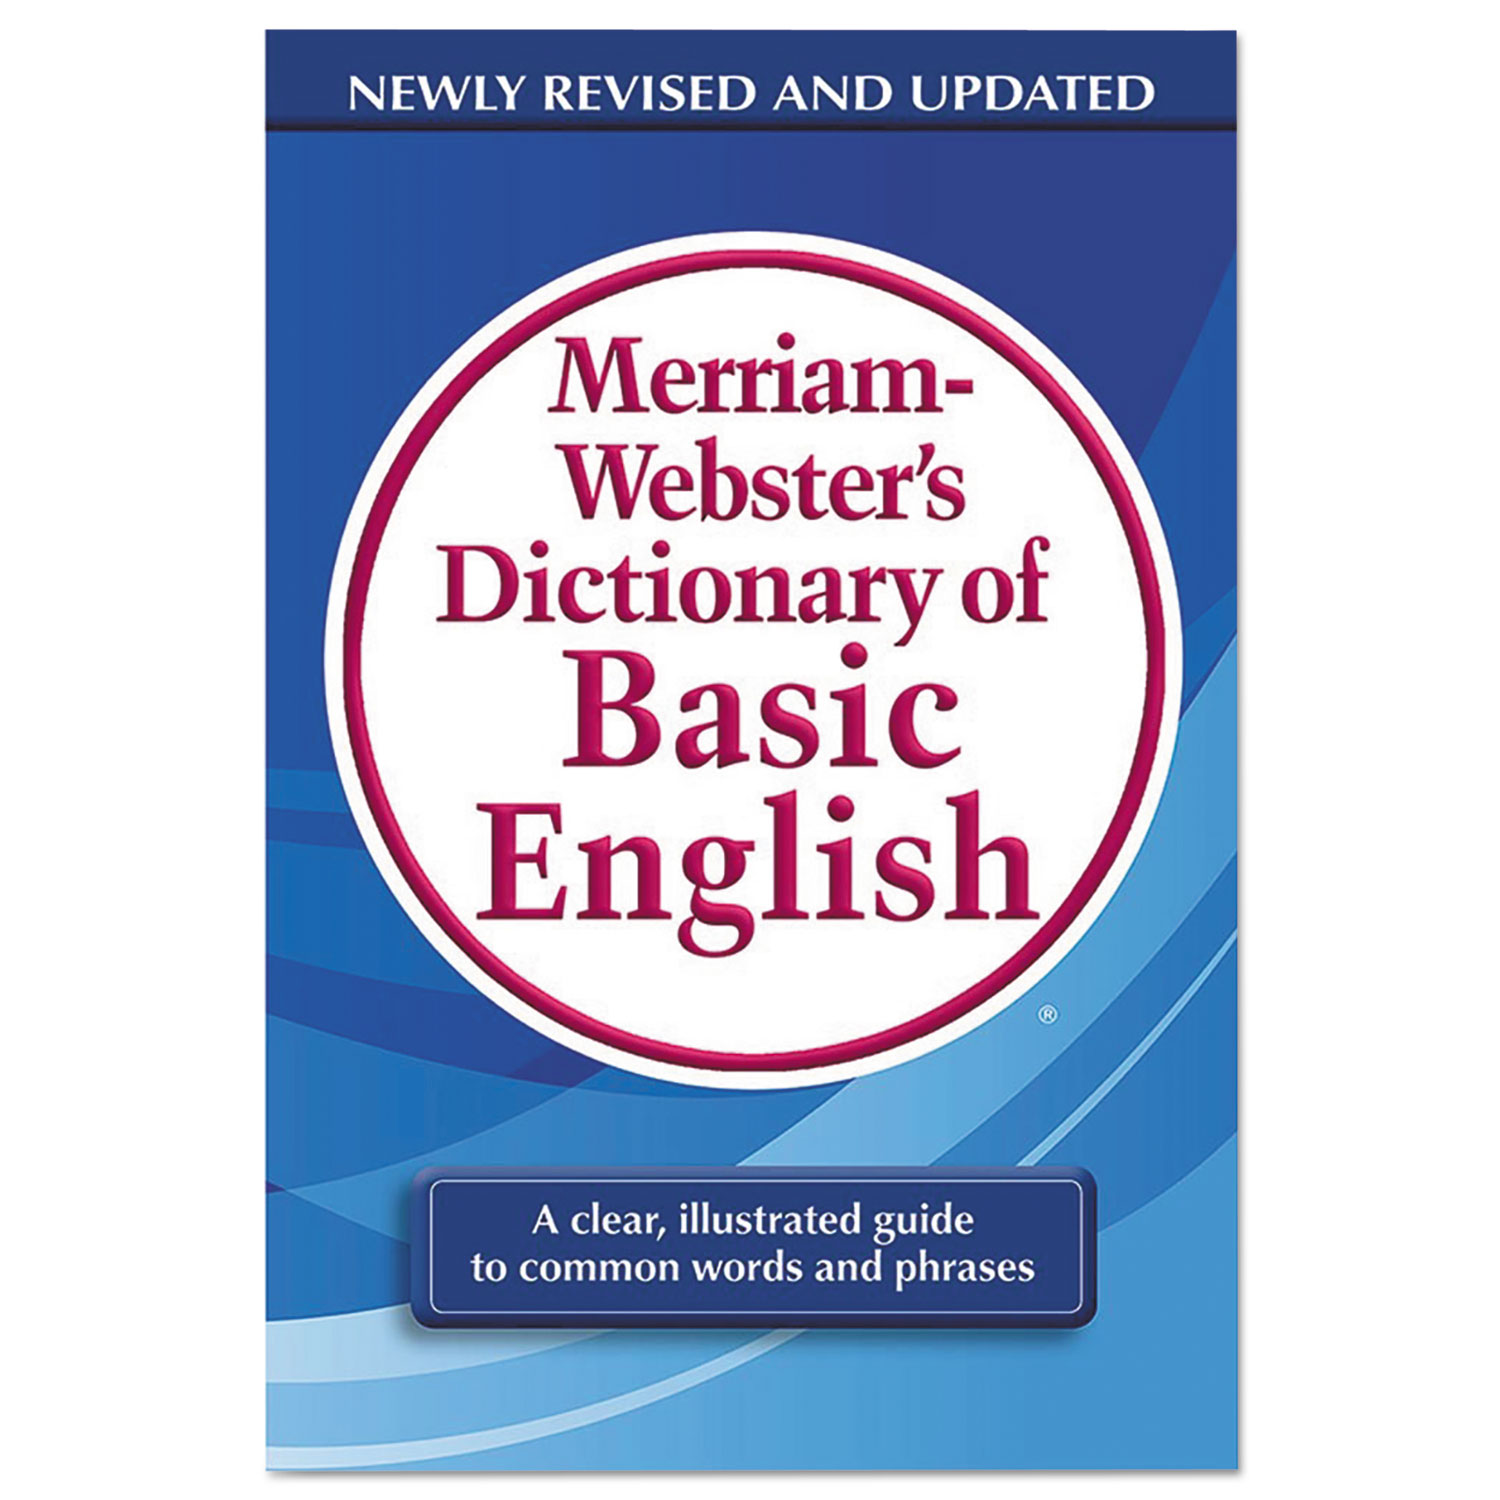  Merriam Webster MER731-9 Dictionary of Basic English, Paperback, 800 Pages (MER7319) 